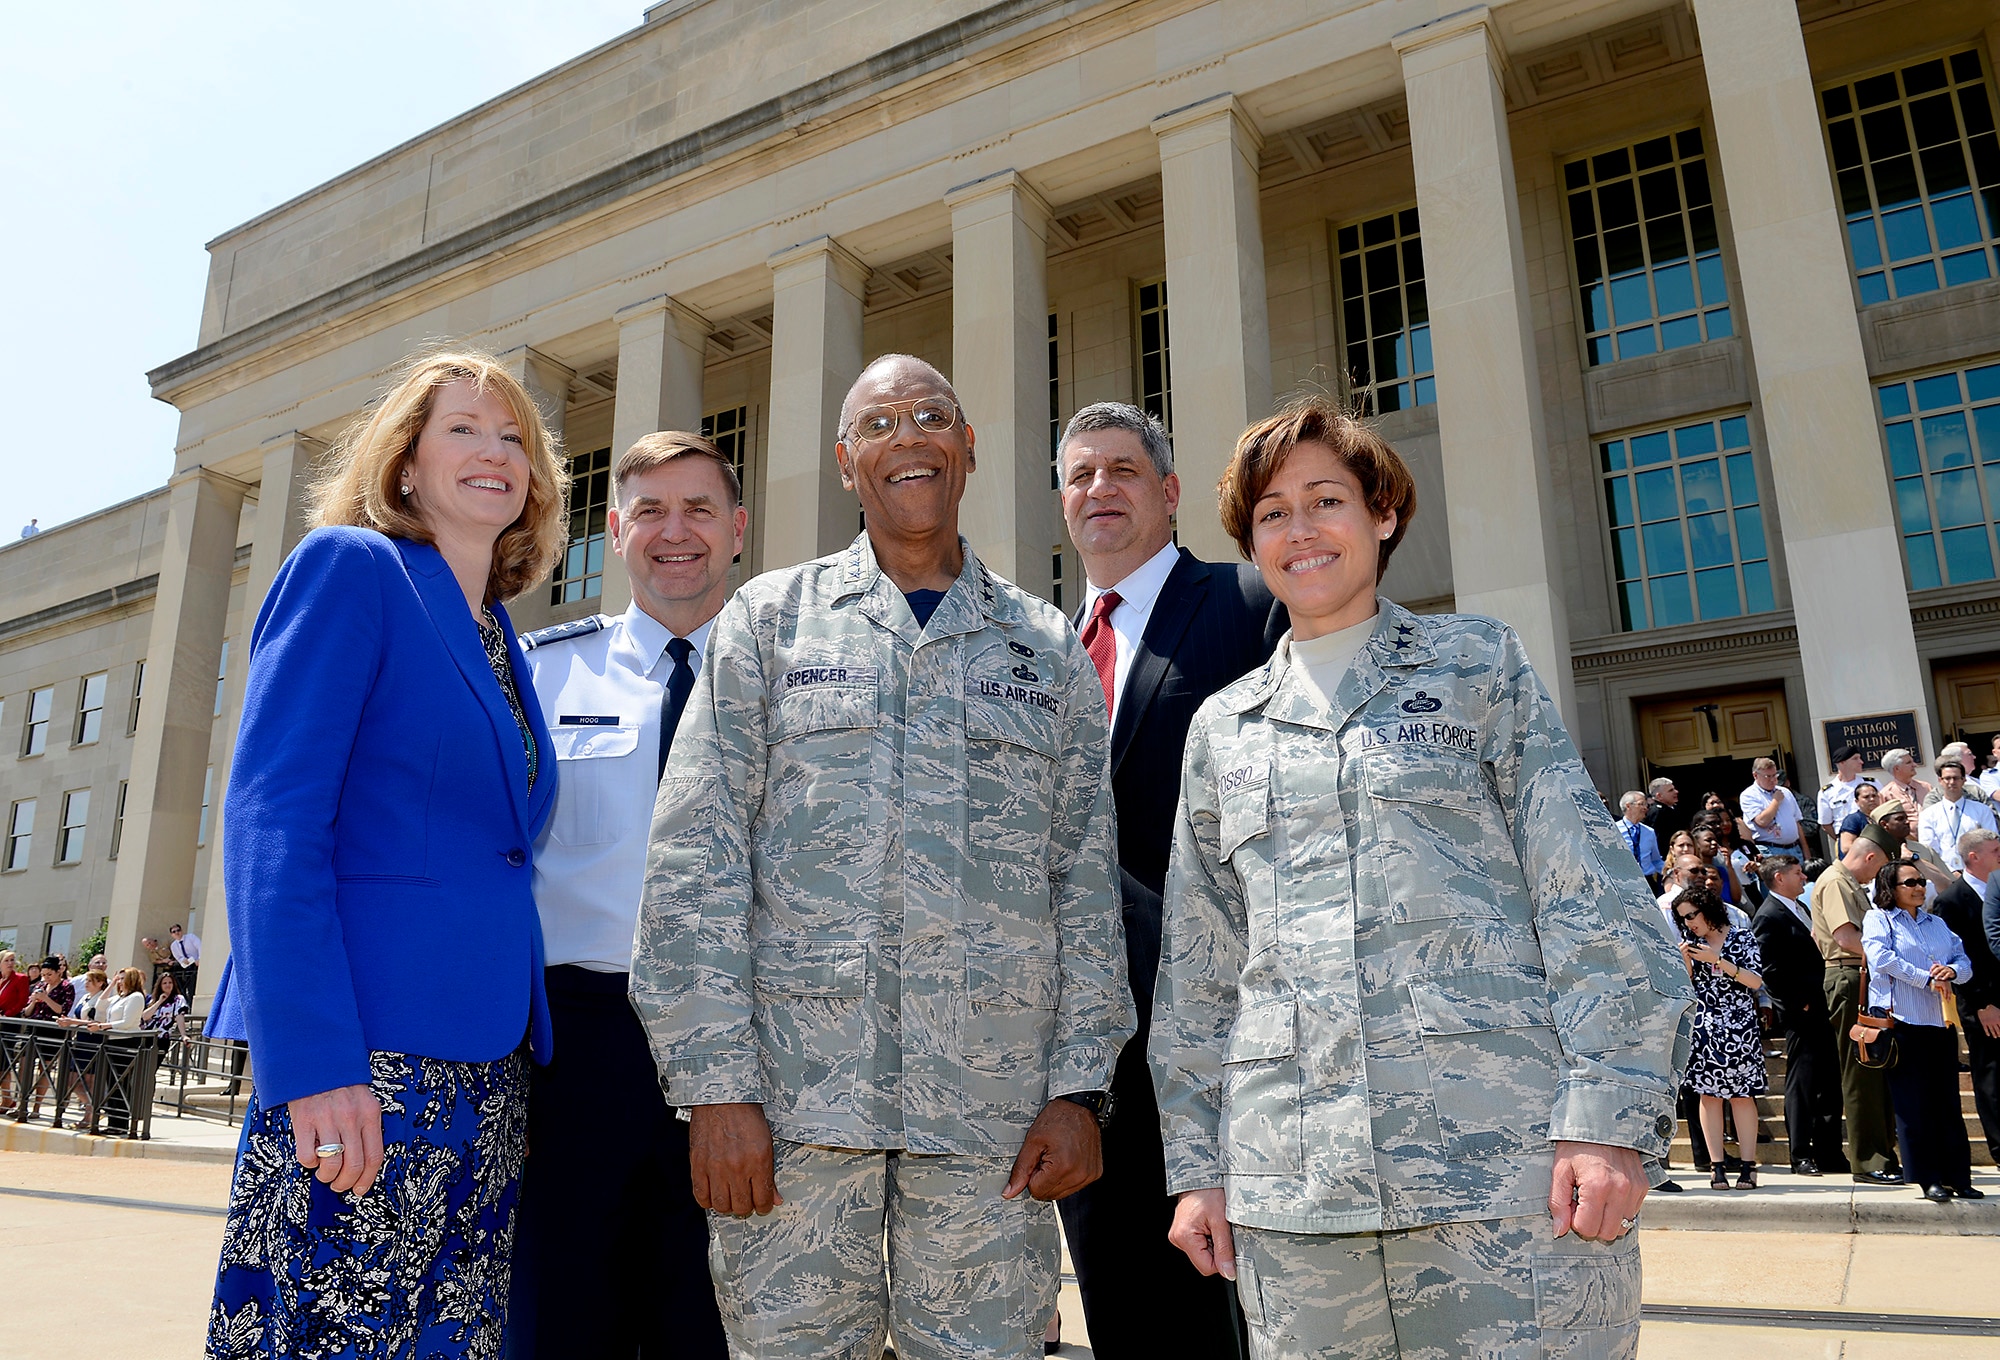 Lisa S. Disbrow, the acting under secretary of the Air Force; Lt. Gen. Stephen L. Hoog, the assistant Air Force vice chief of staff; Gen. Larry O. Spencer, the Air Force vice chief of staff; Dr. William A. LaPlante, the assistant secretary of the Air Force for Acquisition; and Maj. Gen. Gina Grosso, the director of the Air Force Sexual Assault Prevention and Response Office; stand in front of the Pentagon for a photo during the Arsenal of Democracy Flyover May 8, 2015, in Washington, D.C. (U.S. Air Force photo/Scott Ash)